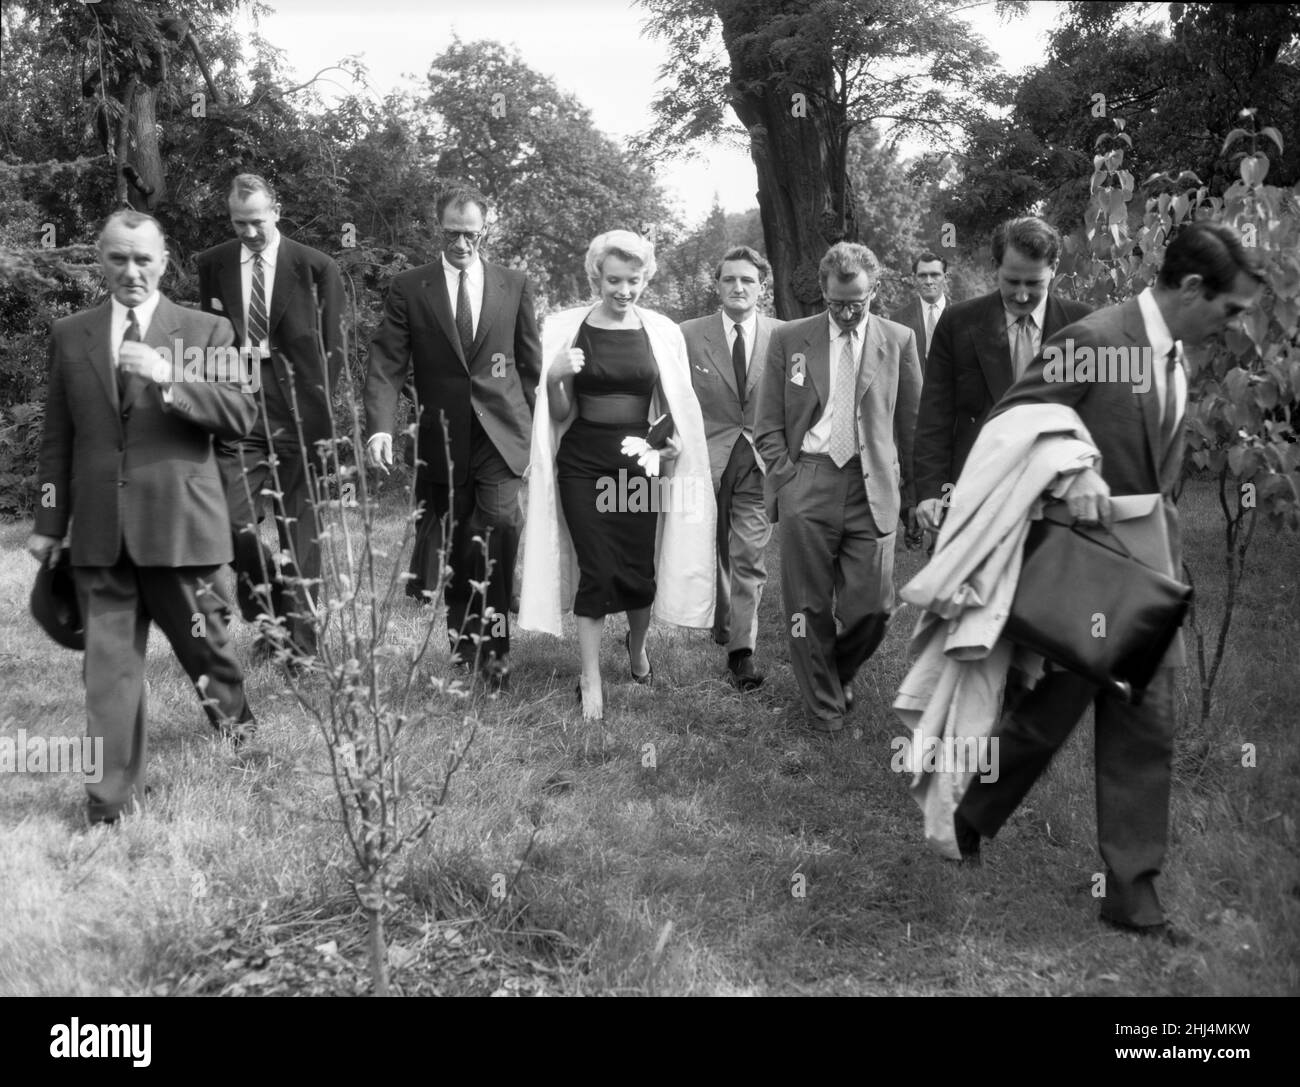 Marilyn Monroe and her husband, playwright Arthur Miller (3rd from the left), pictured in Englefield, Surrey, Picture taken 15th July 1956 The couple had married on 29th June of 1956.  Marilyn Monroe is in England to film 'The Prince and the Showgirl', with Sir Laurence Olivier. She is living in Parkside House on a large country estate in Englefield Green for the entire stay.  Marilyn Monroe was born Norma Jeane Mortenson on June 1, 1926 Los Angeles, California, U.S.A. and died August 5, 1962 (aged 36) Los Angeles, California, U.S.A. Stock Photo